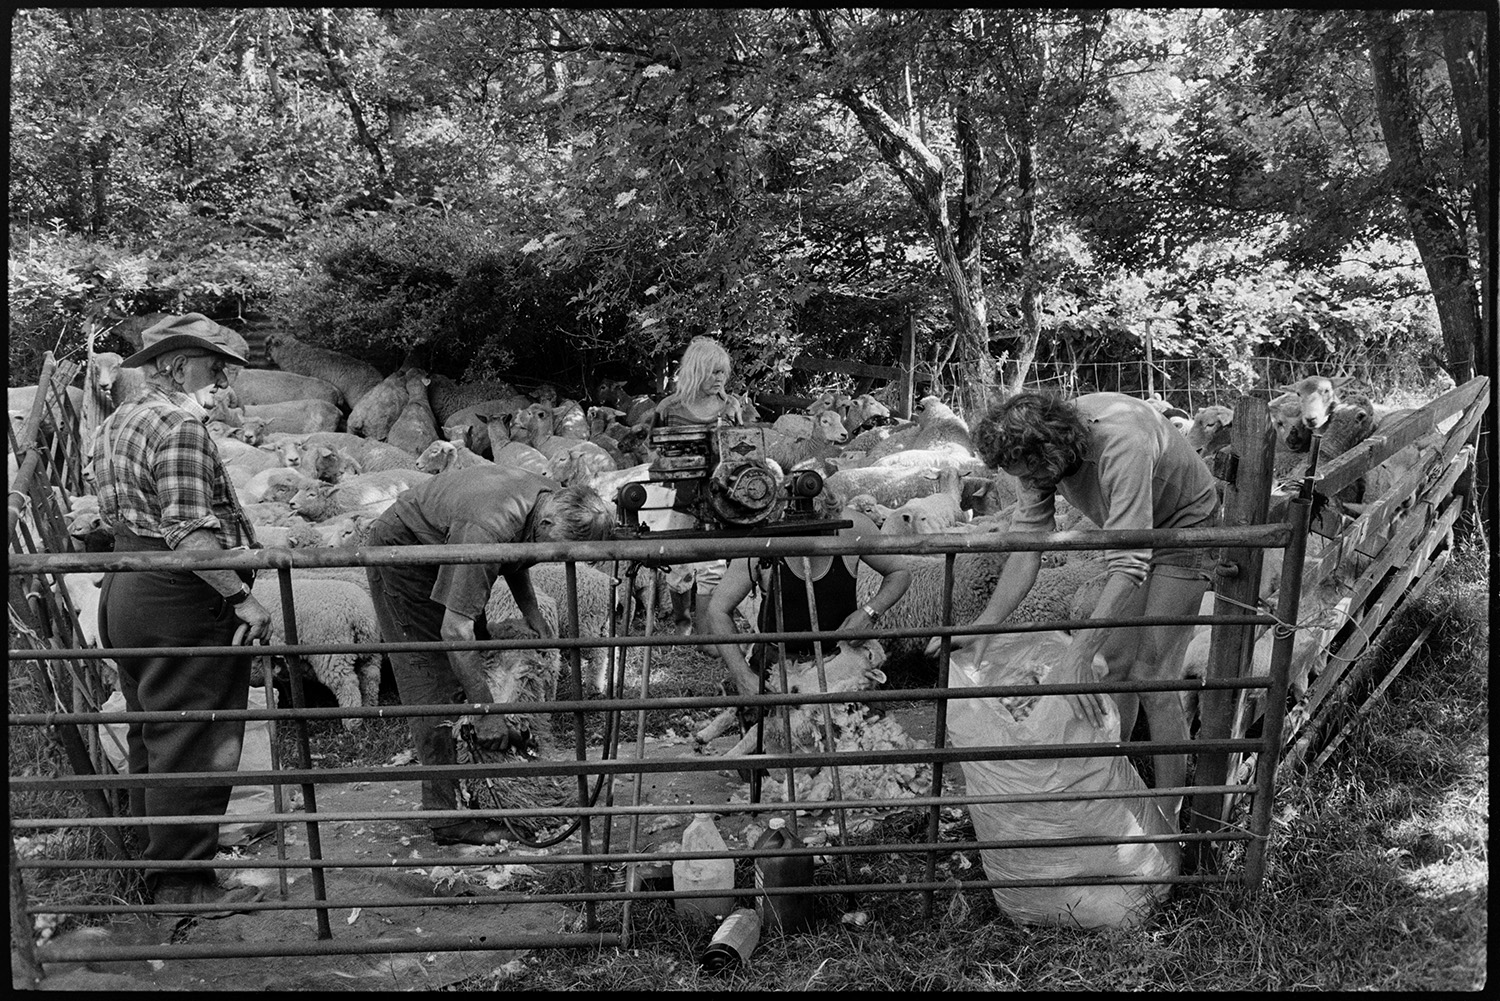 Farmers shearing sheep.
[Archie Parkhouse supervising the shearing of a flock of sheep by two men inside a metal and wooden pen next to woodland at Addisford, Dolton. They are using a shearing machine and another man is bagging up the fleeces. Jo Curzon is watching in the background.]